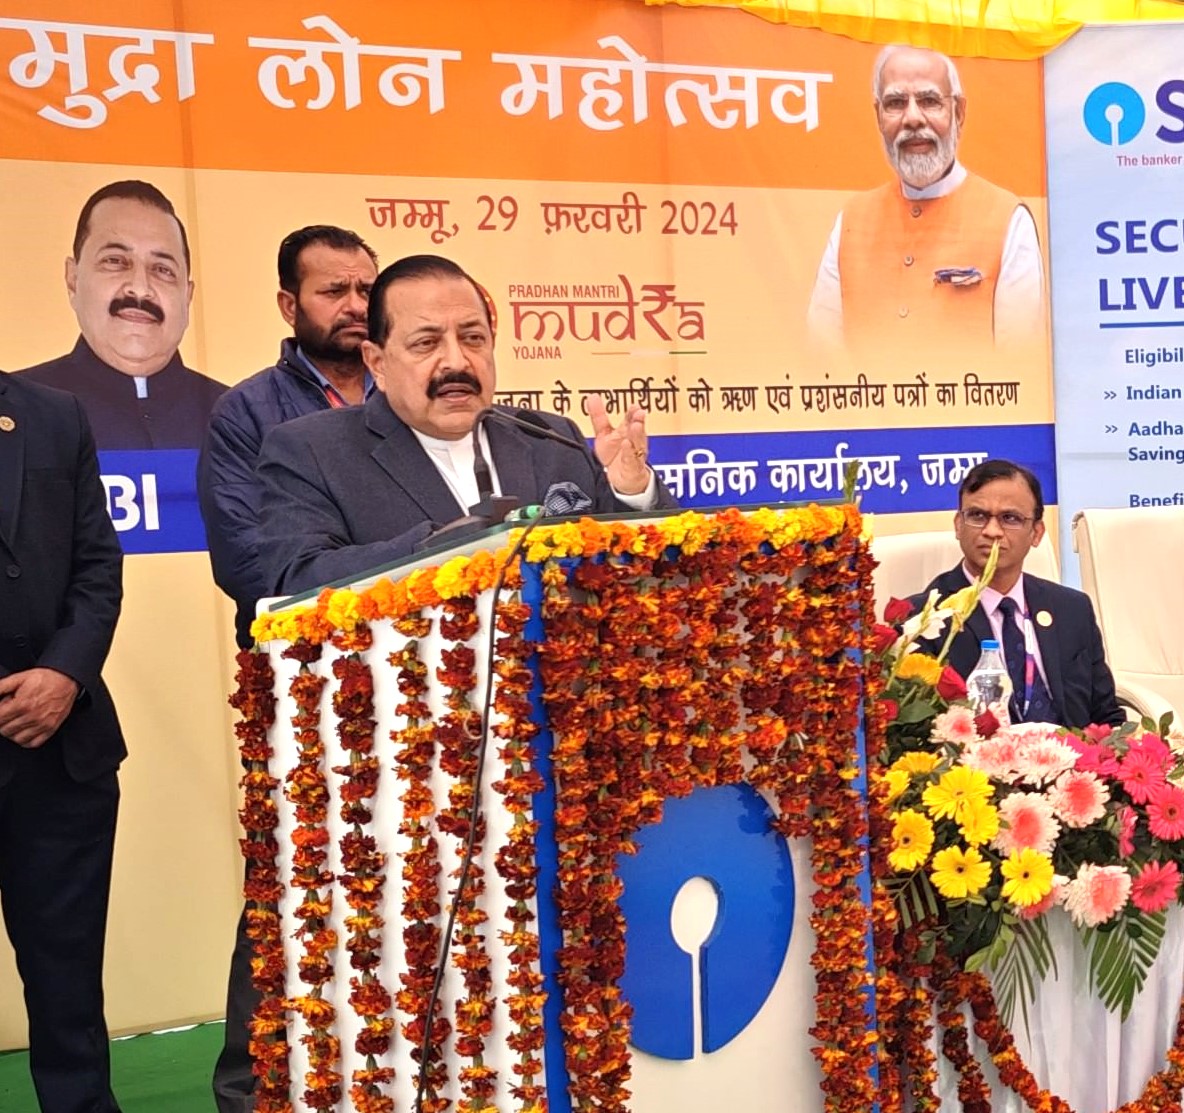 Prime Minister Shri Narendra Modi has created lucrative livelihood opportunities other than government jobs through different schemes like MUDRA, Start-Up India, Aroma Mission etc., says Union Minister Dr Jitendra Singh